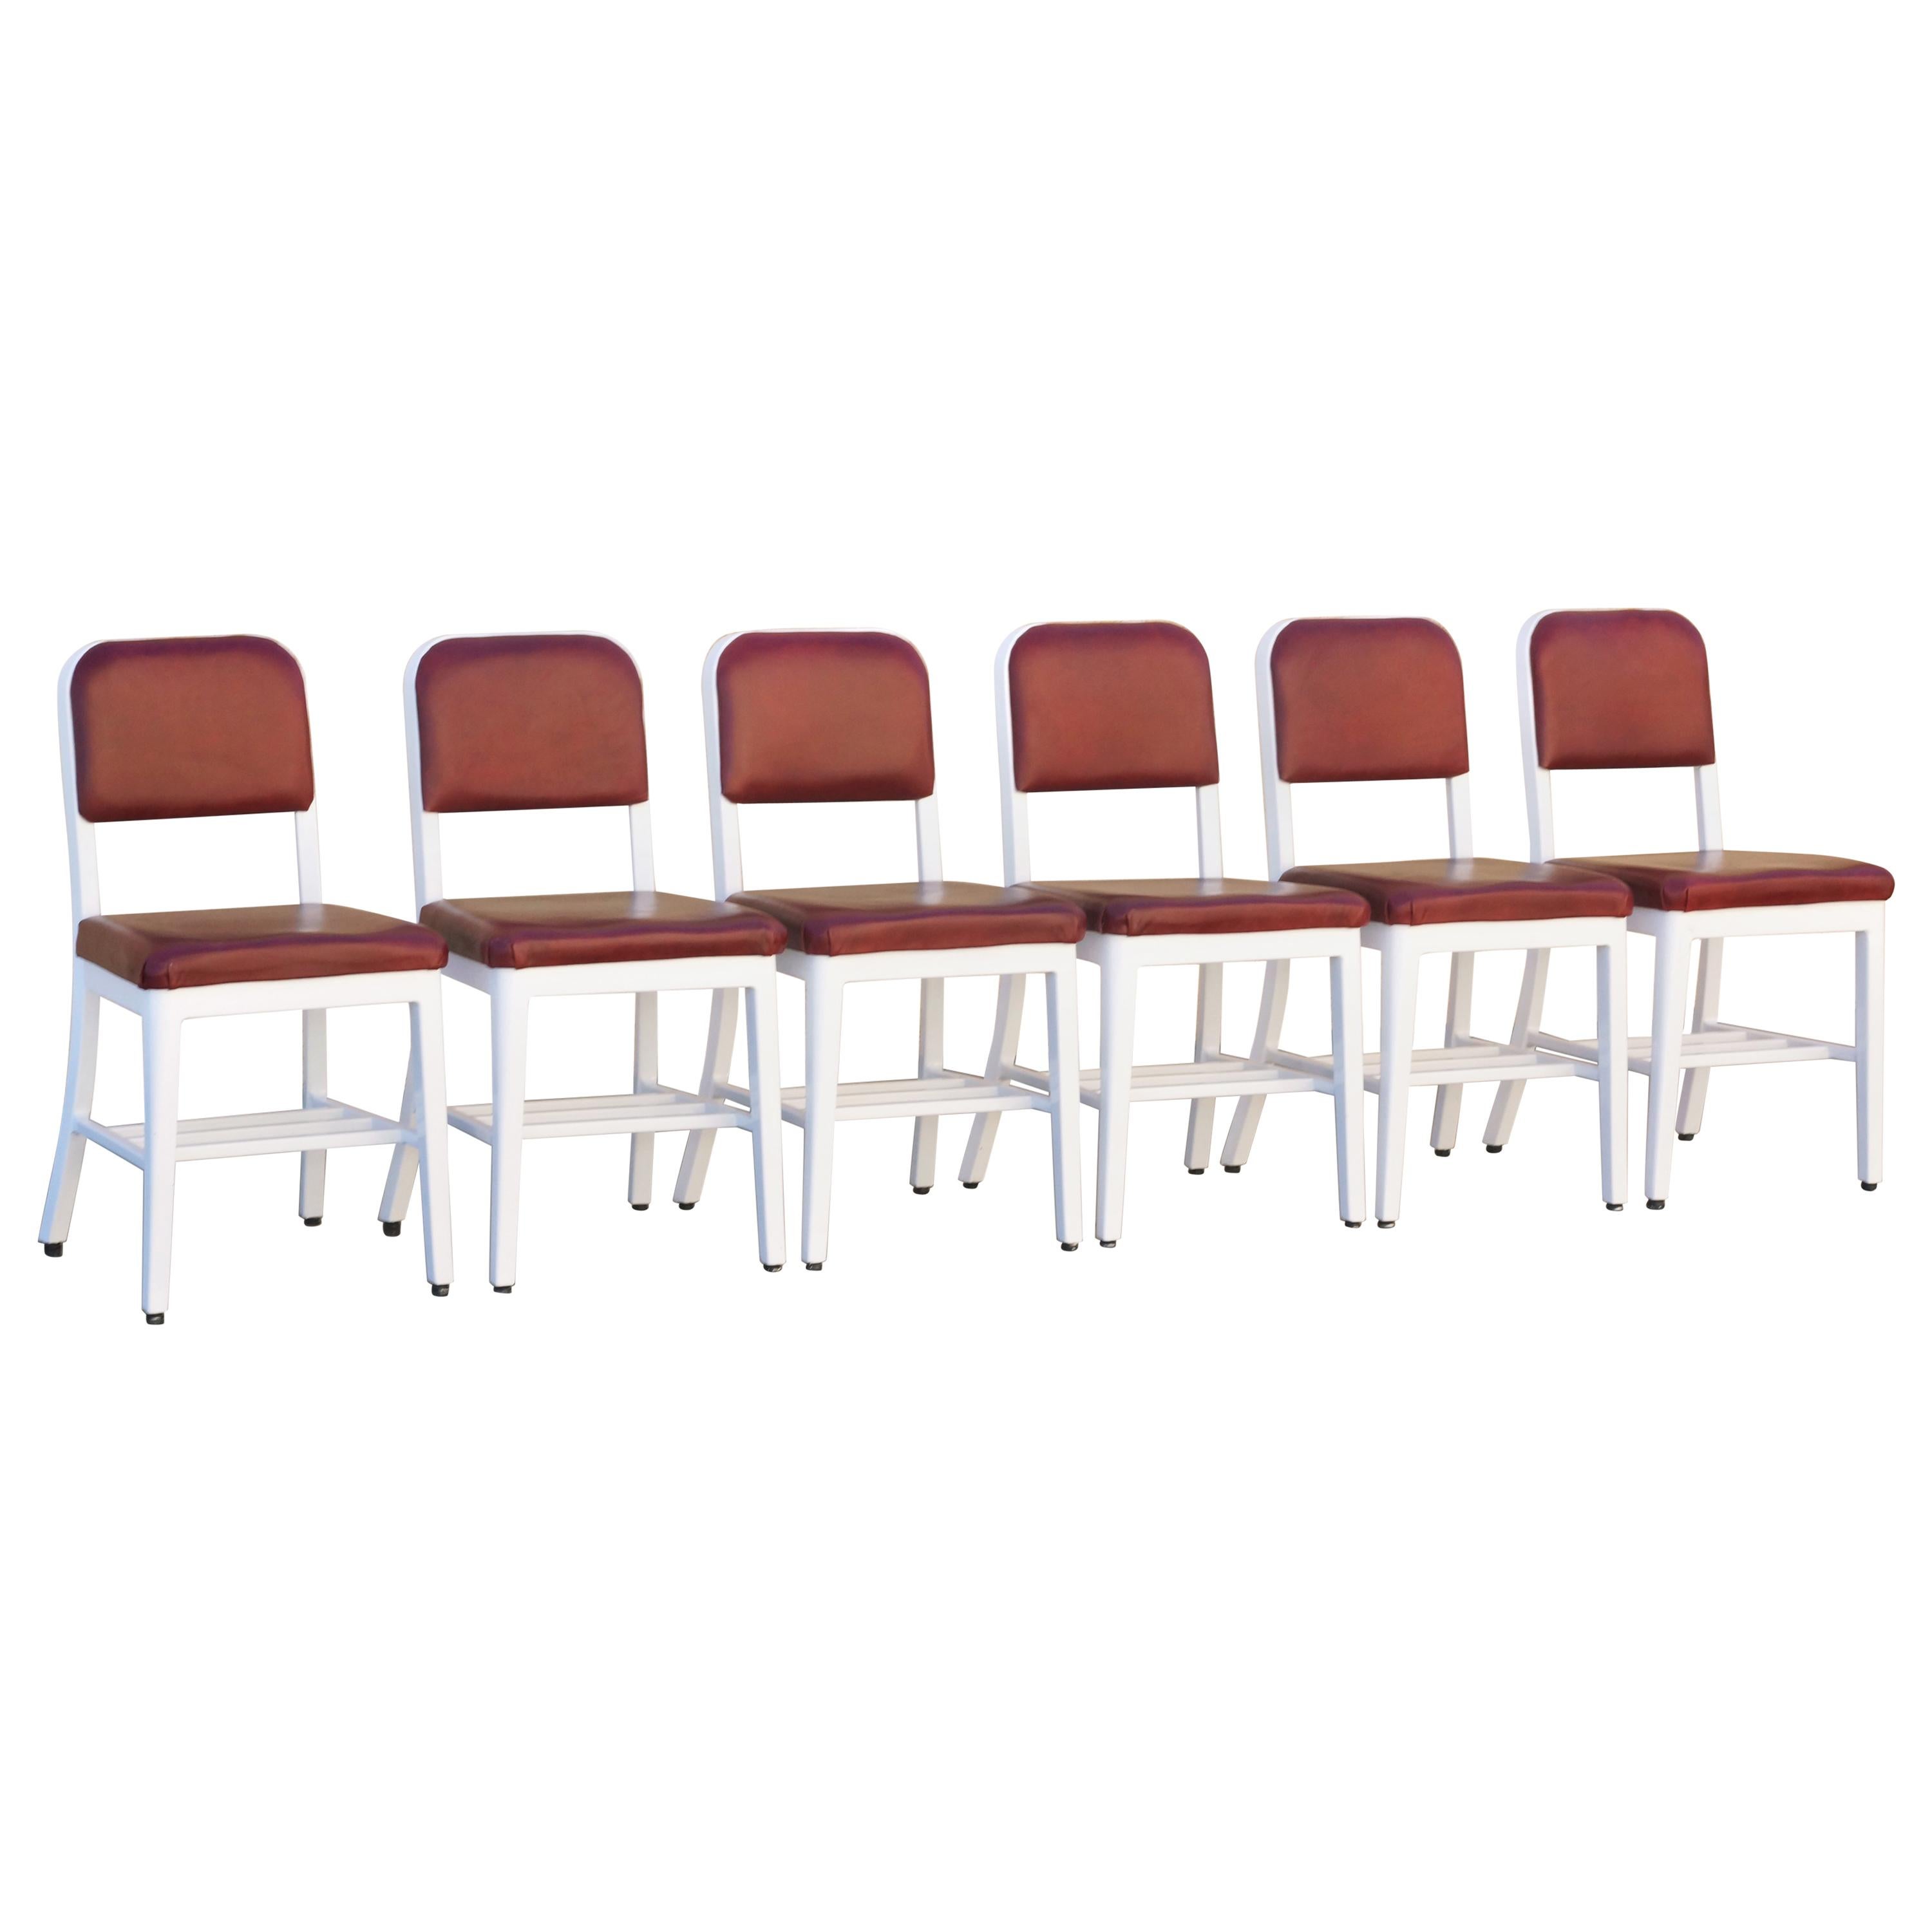 Set of 6 "Goodform" Side Chairs by General Fireproofing Co., Refinished